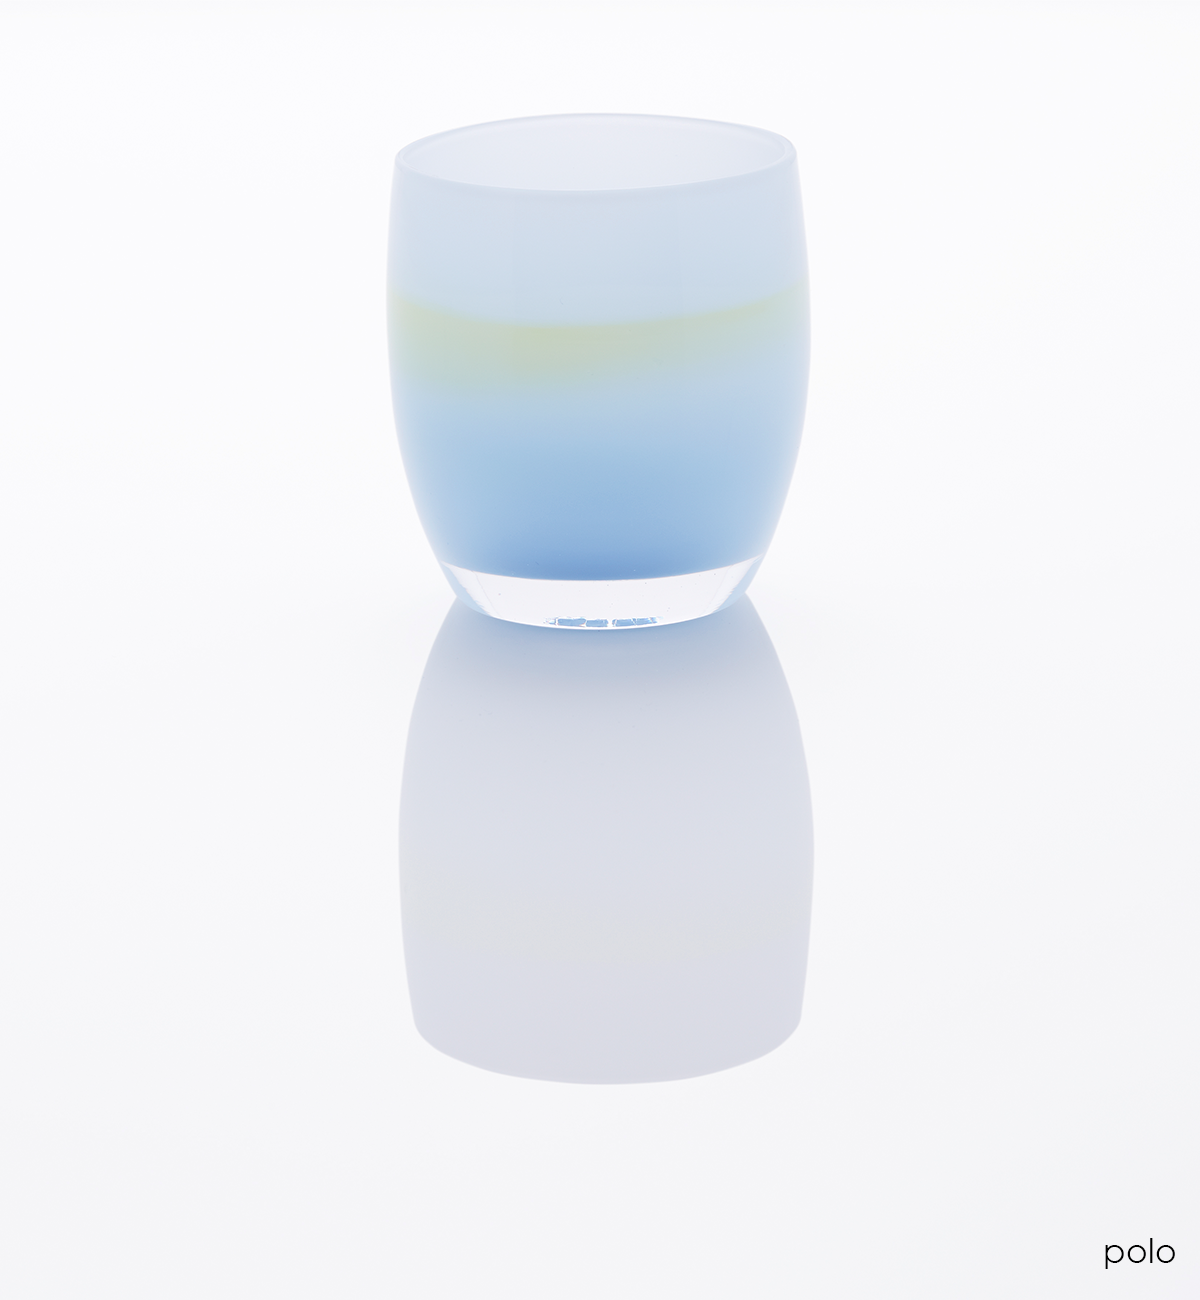 polo light blue with yellow band in the center hand-blown glass votive candle holder 